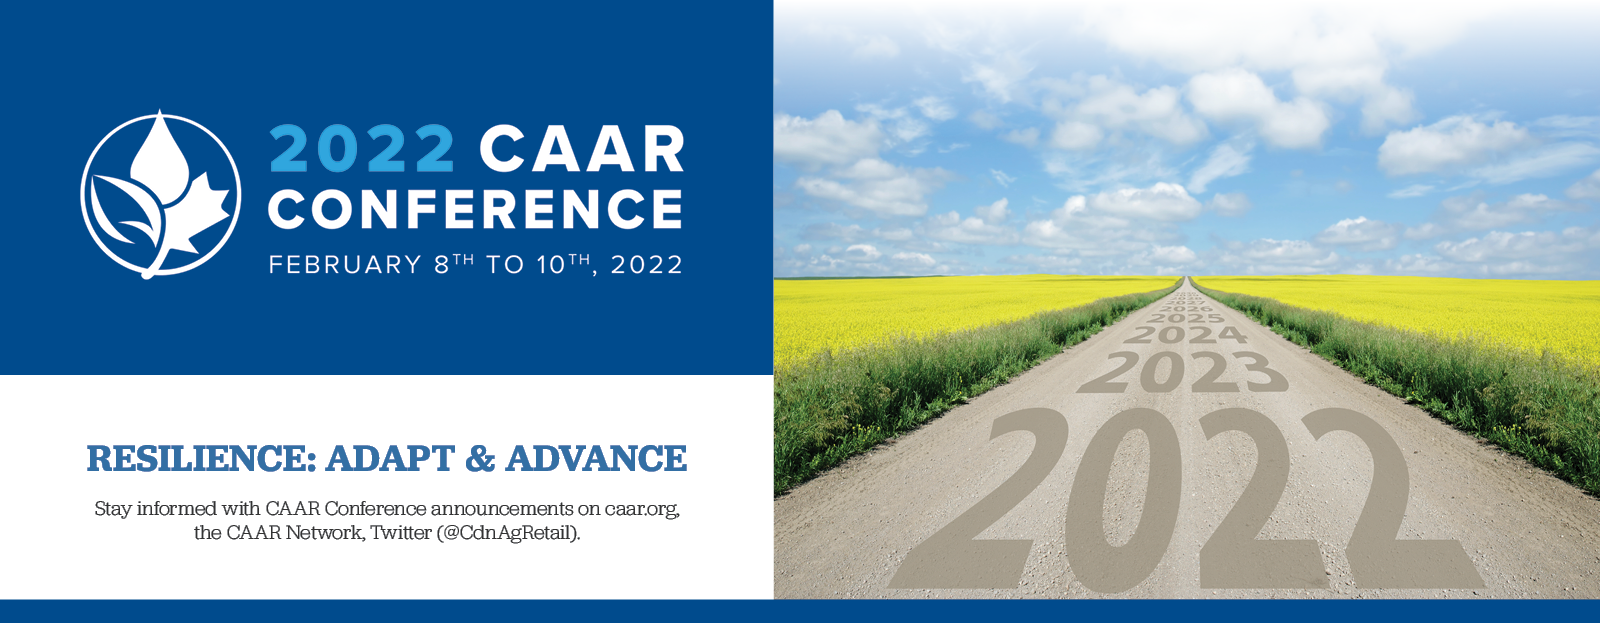 Banner for CAAR Conference